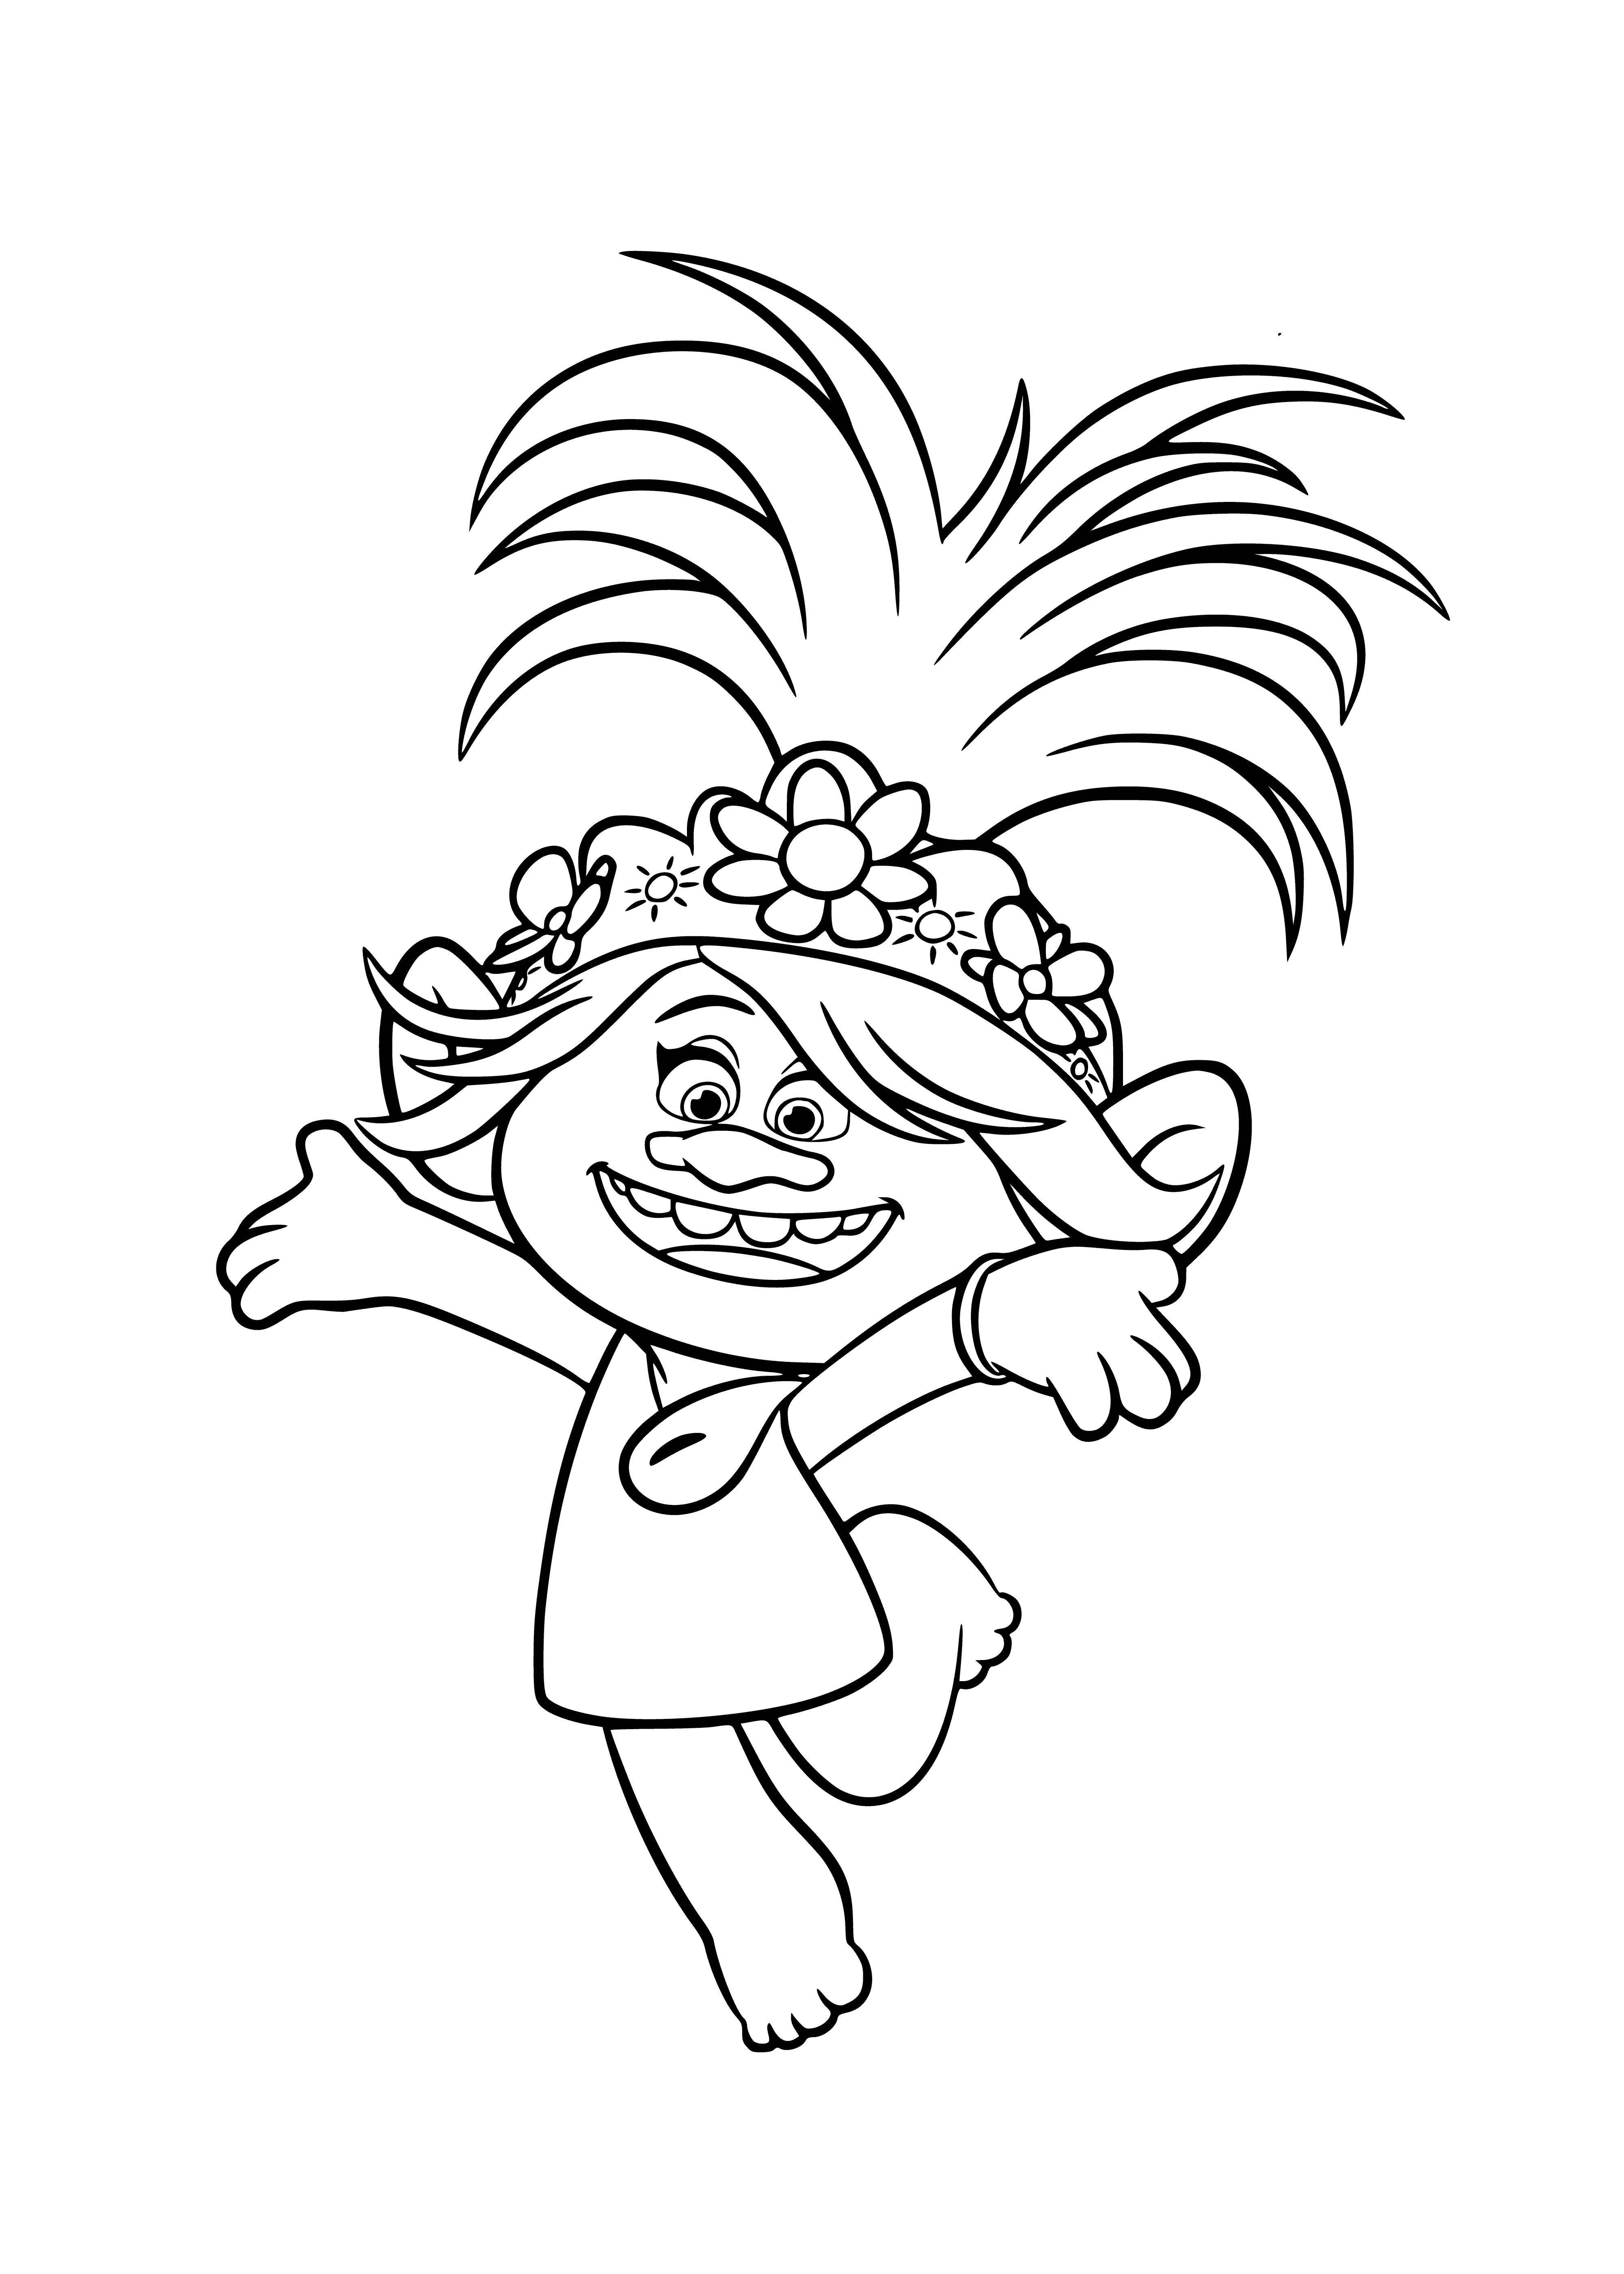 coloring page: Small Troll with big head and long, stringy hair. Wearing pink shirt and purple bow, holding pom-pom. Big nose, wide smile. #FantasyCharacter